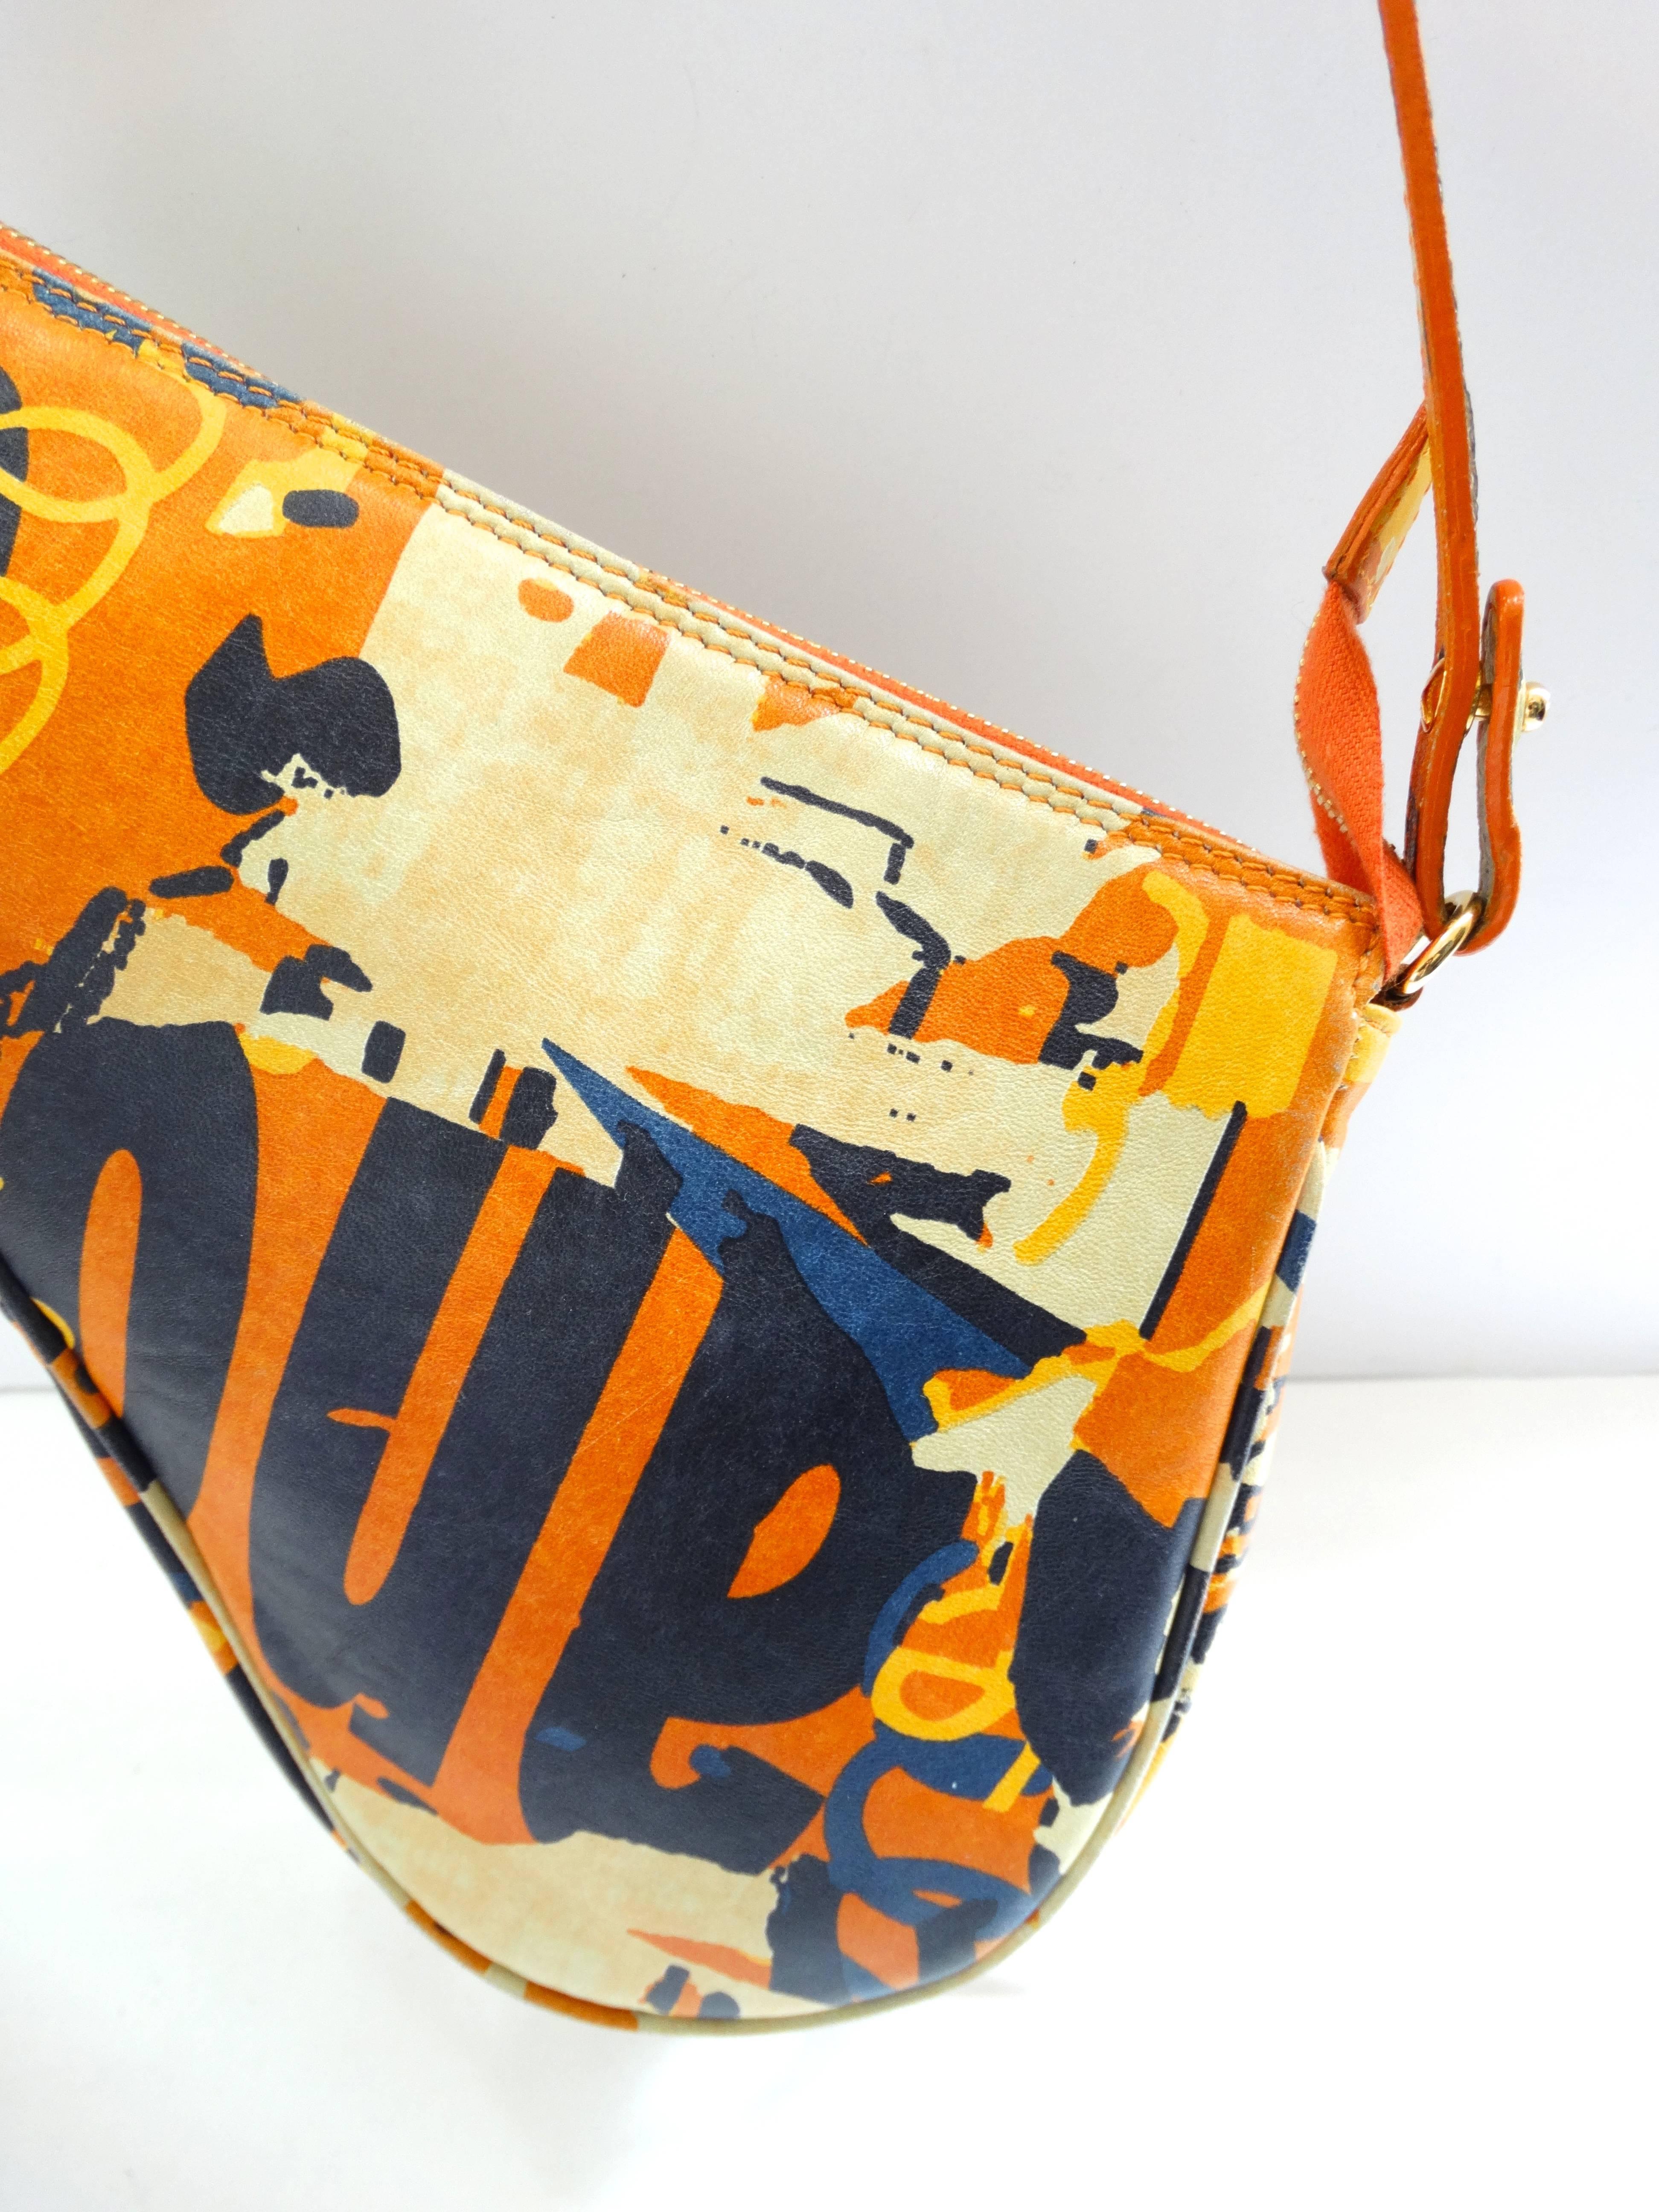 Who doesn't love a little Galliano era Dior? We sure do! This amazing saddle bag comes straight to you from the 1990s- with its bold orange printed leather and over the shoulder strap. Classic Dior saddle bag construction with gold metal CD charm